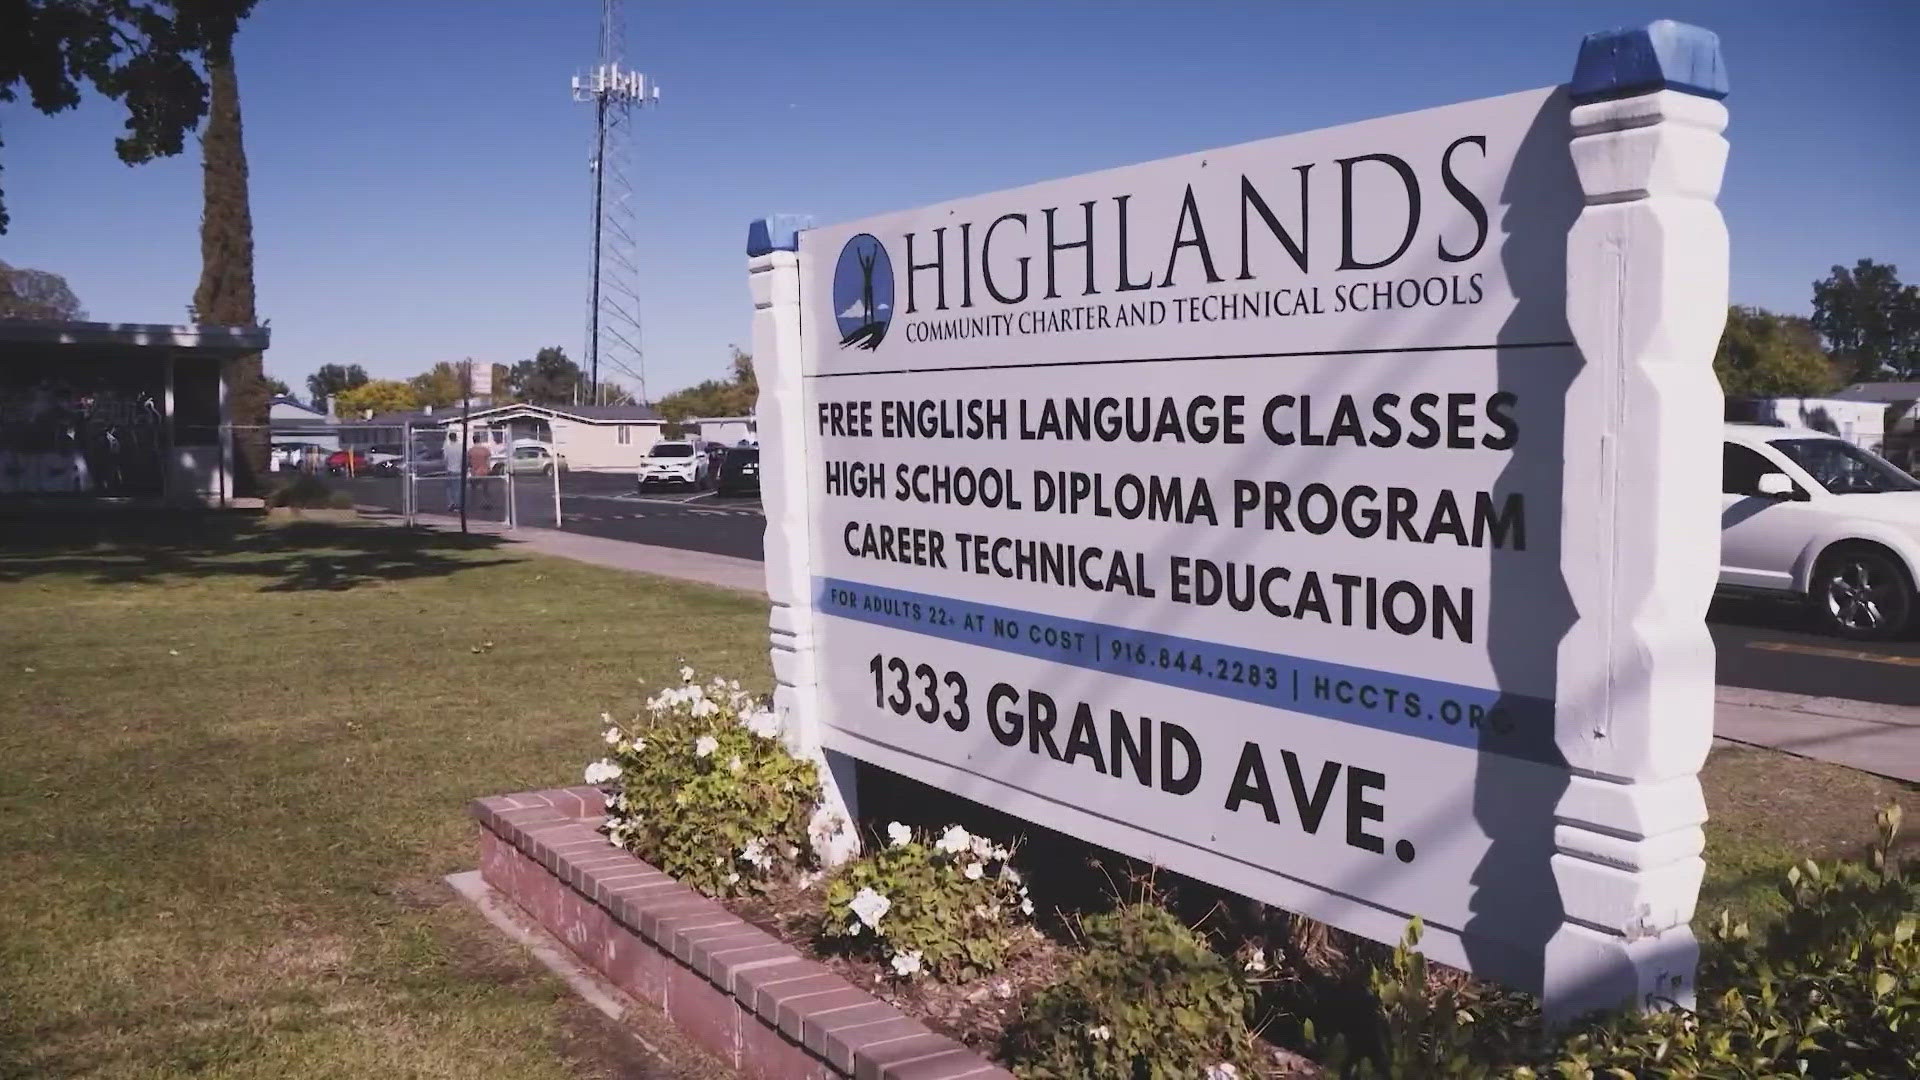 Committee approves audit of Highlands Community Charter School, Twin Rivers Unified